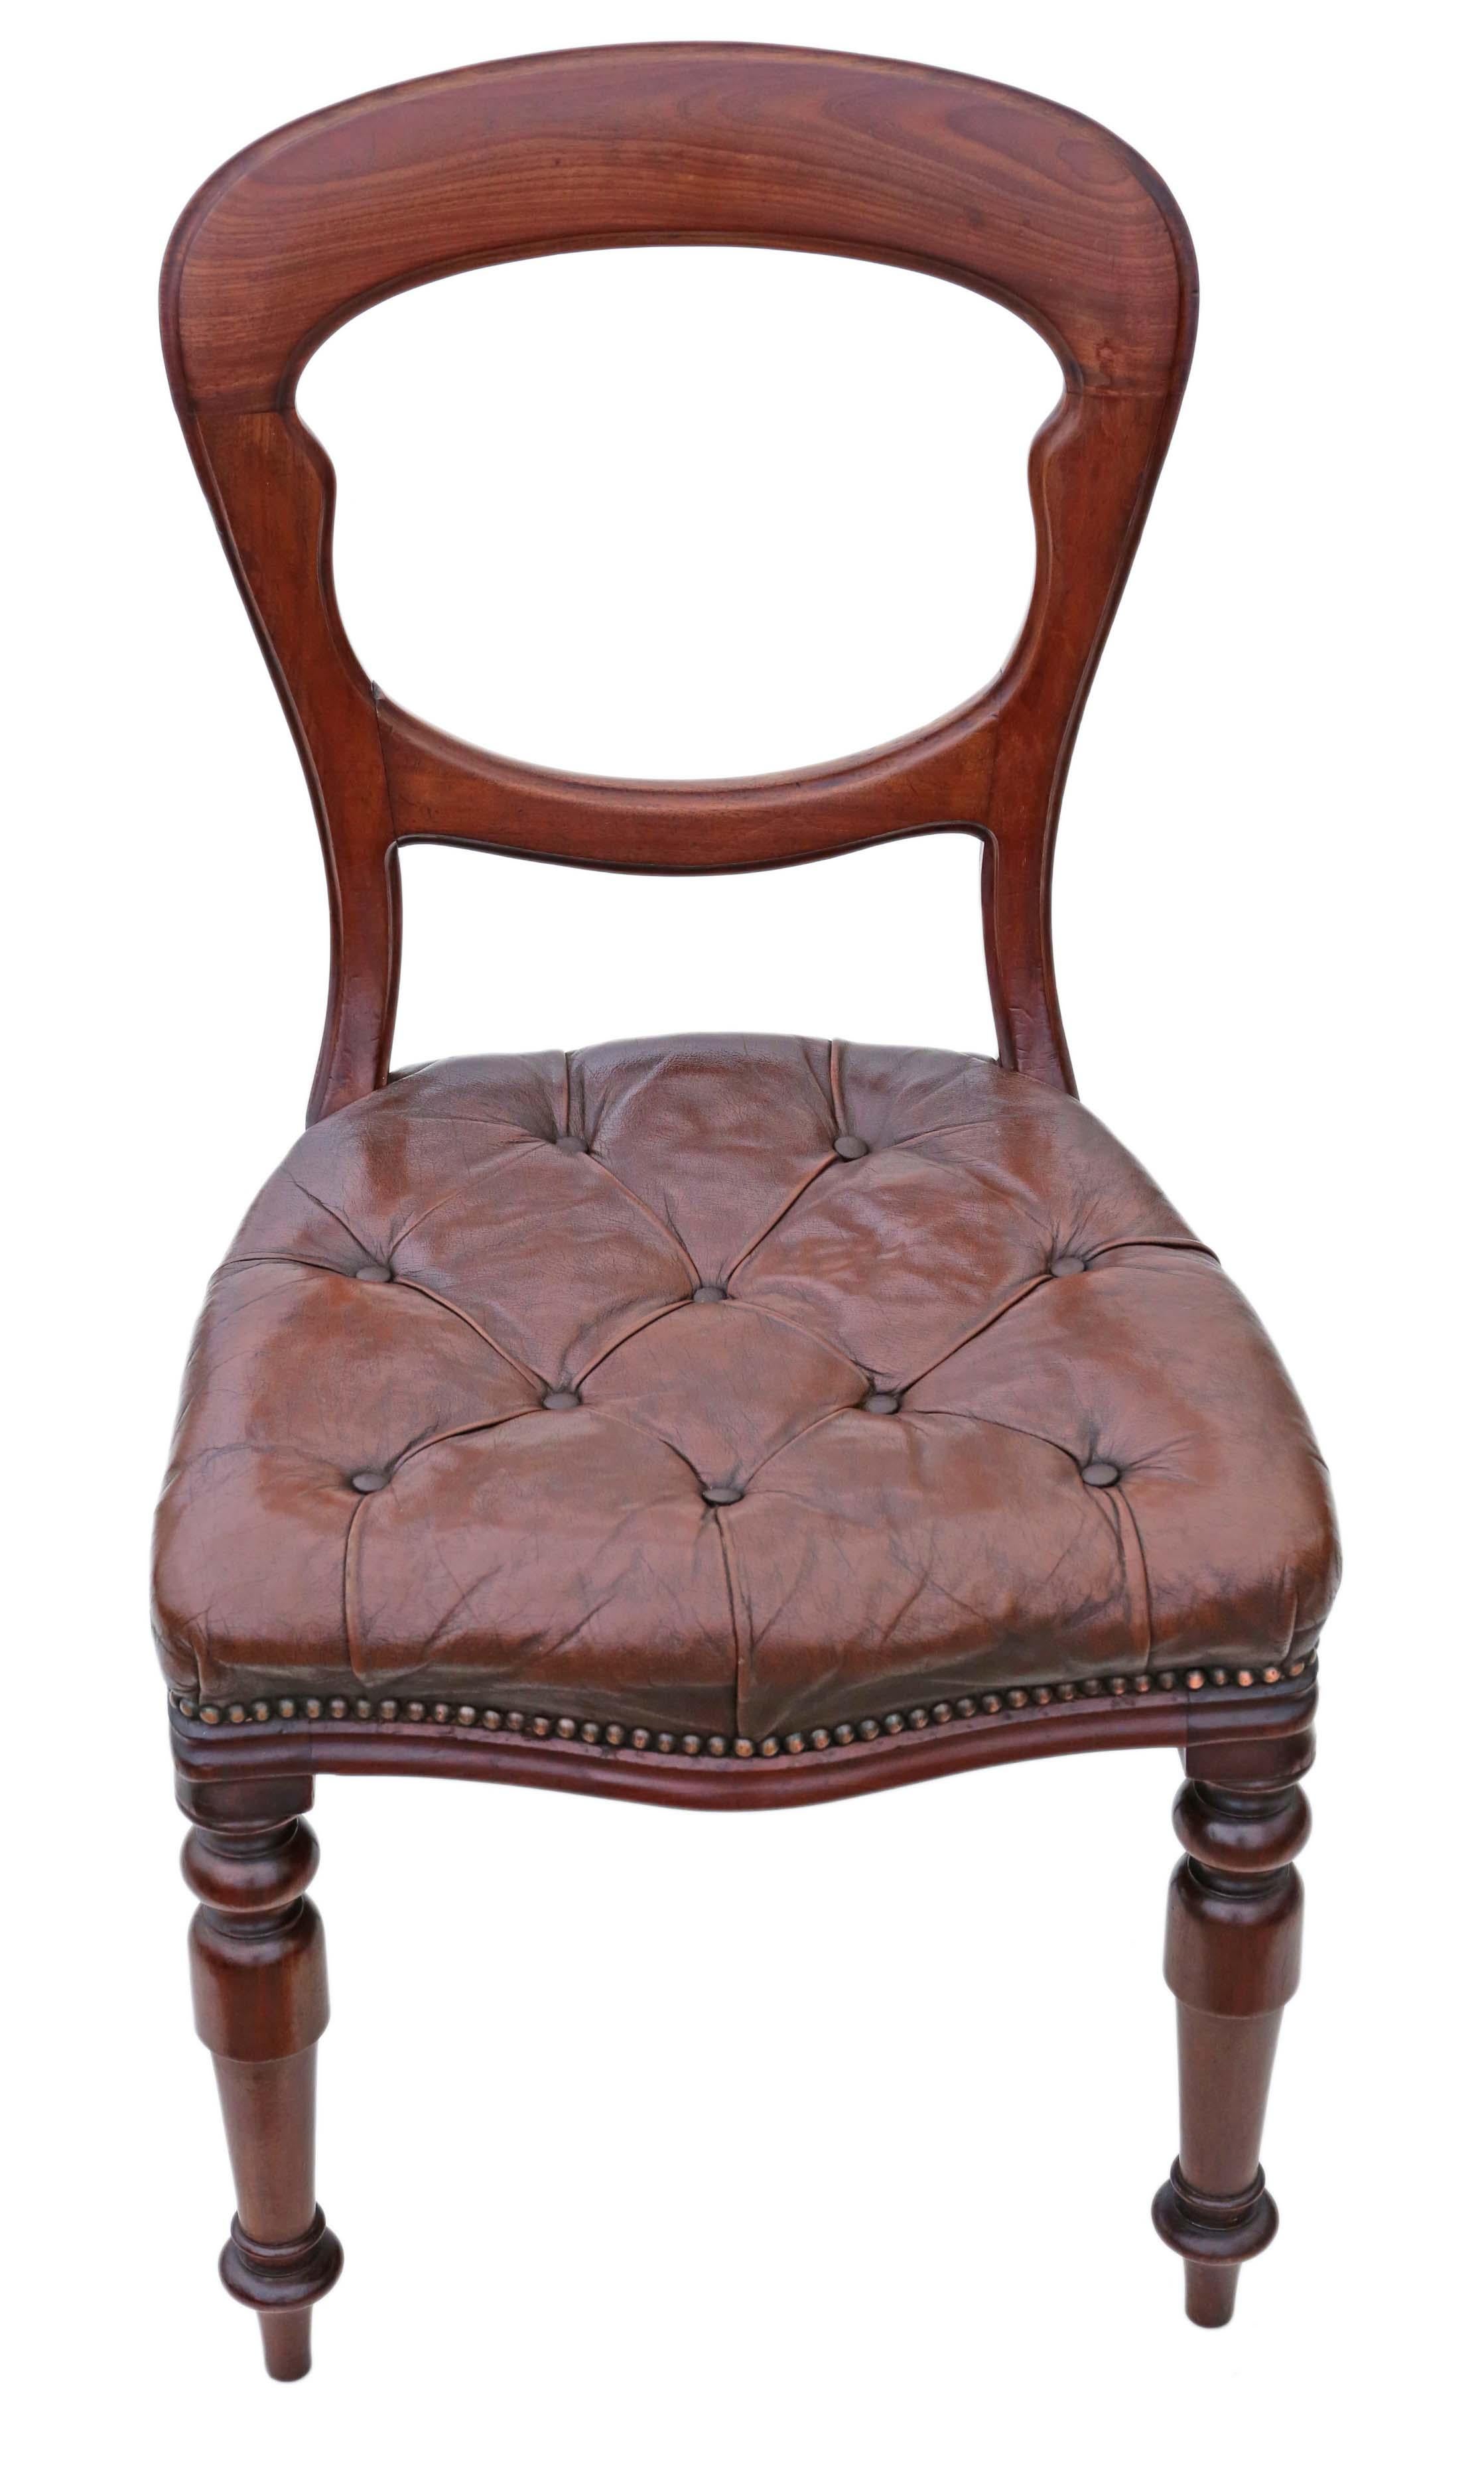 Set of 4 Victorian circa 1880 Mahogany Leather Balloon Back Dining Chairs 1